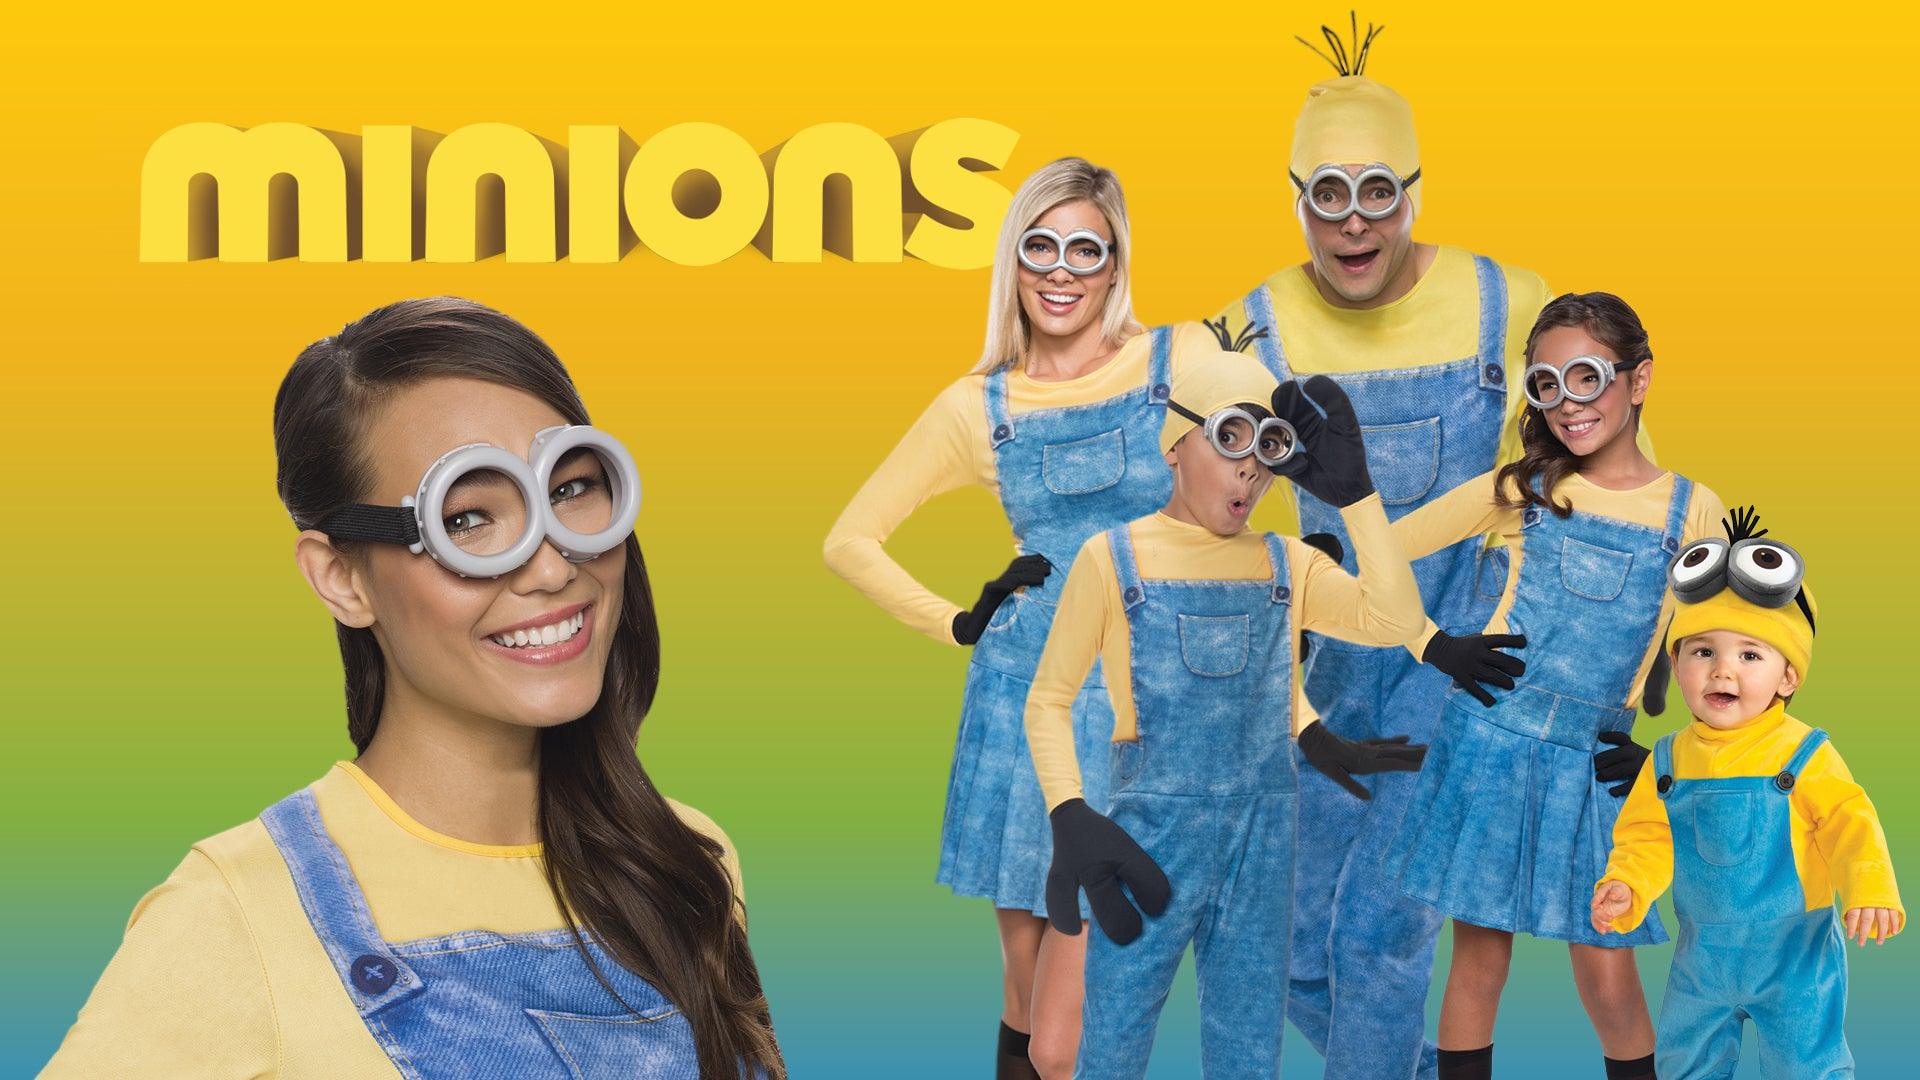 Top 10 Halloween costume themes for families, the minions